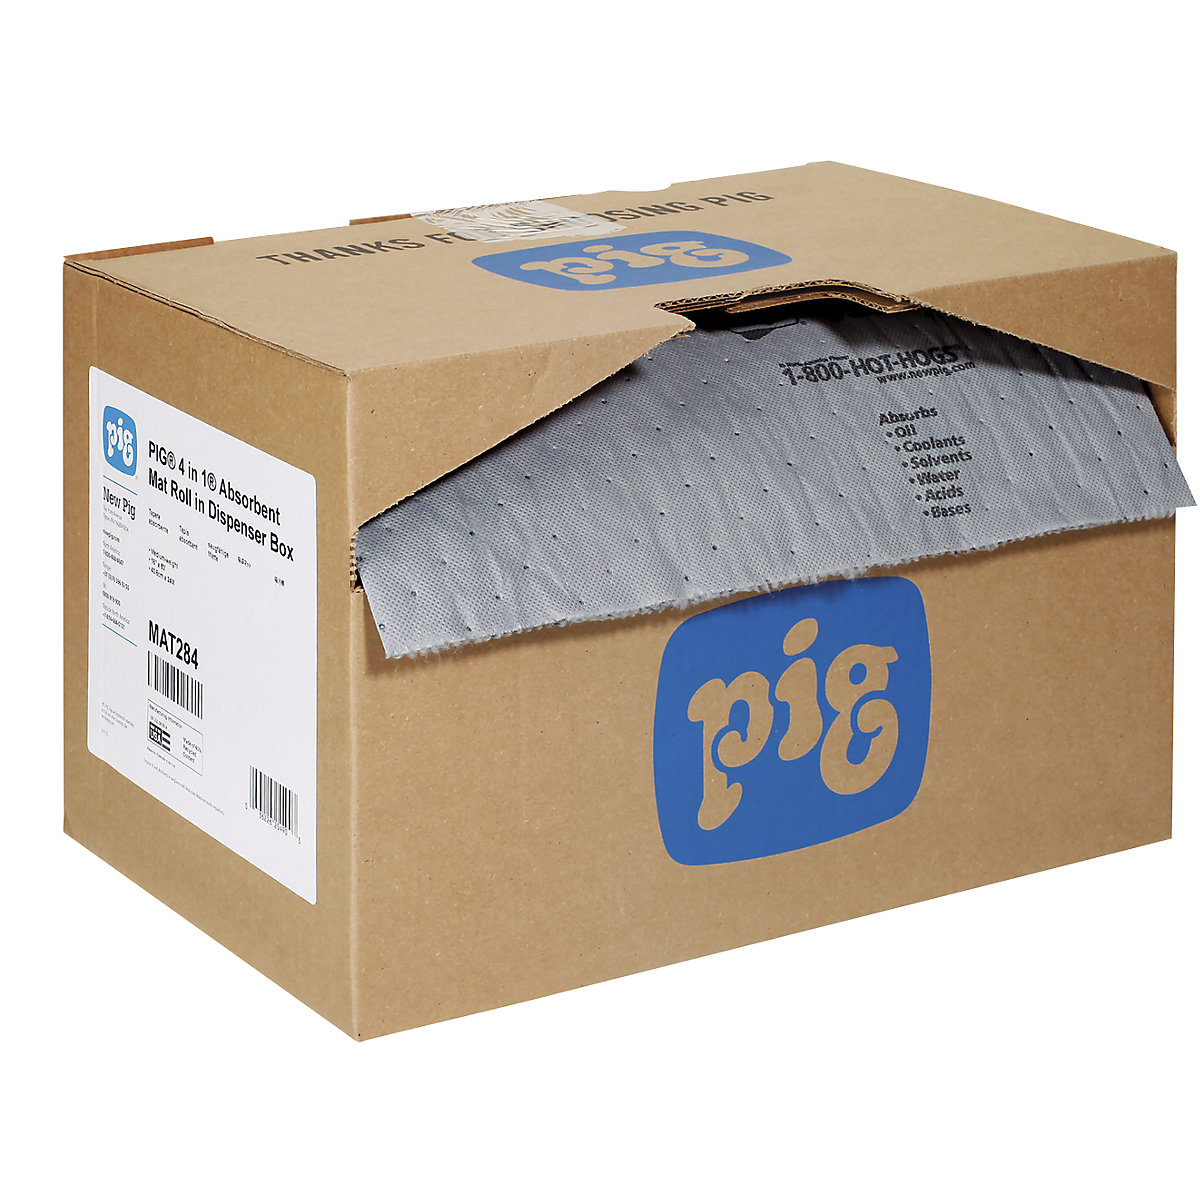 Rouleau absorbant universel 4-in-1® - PIG